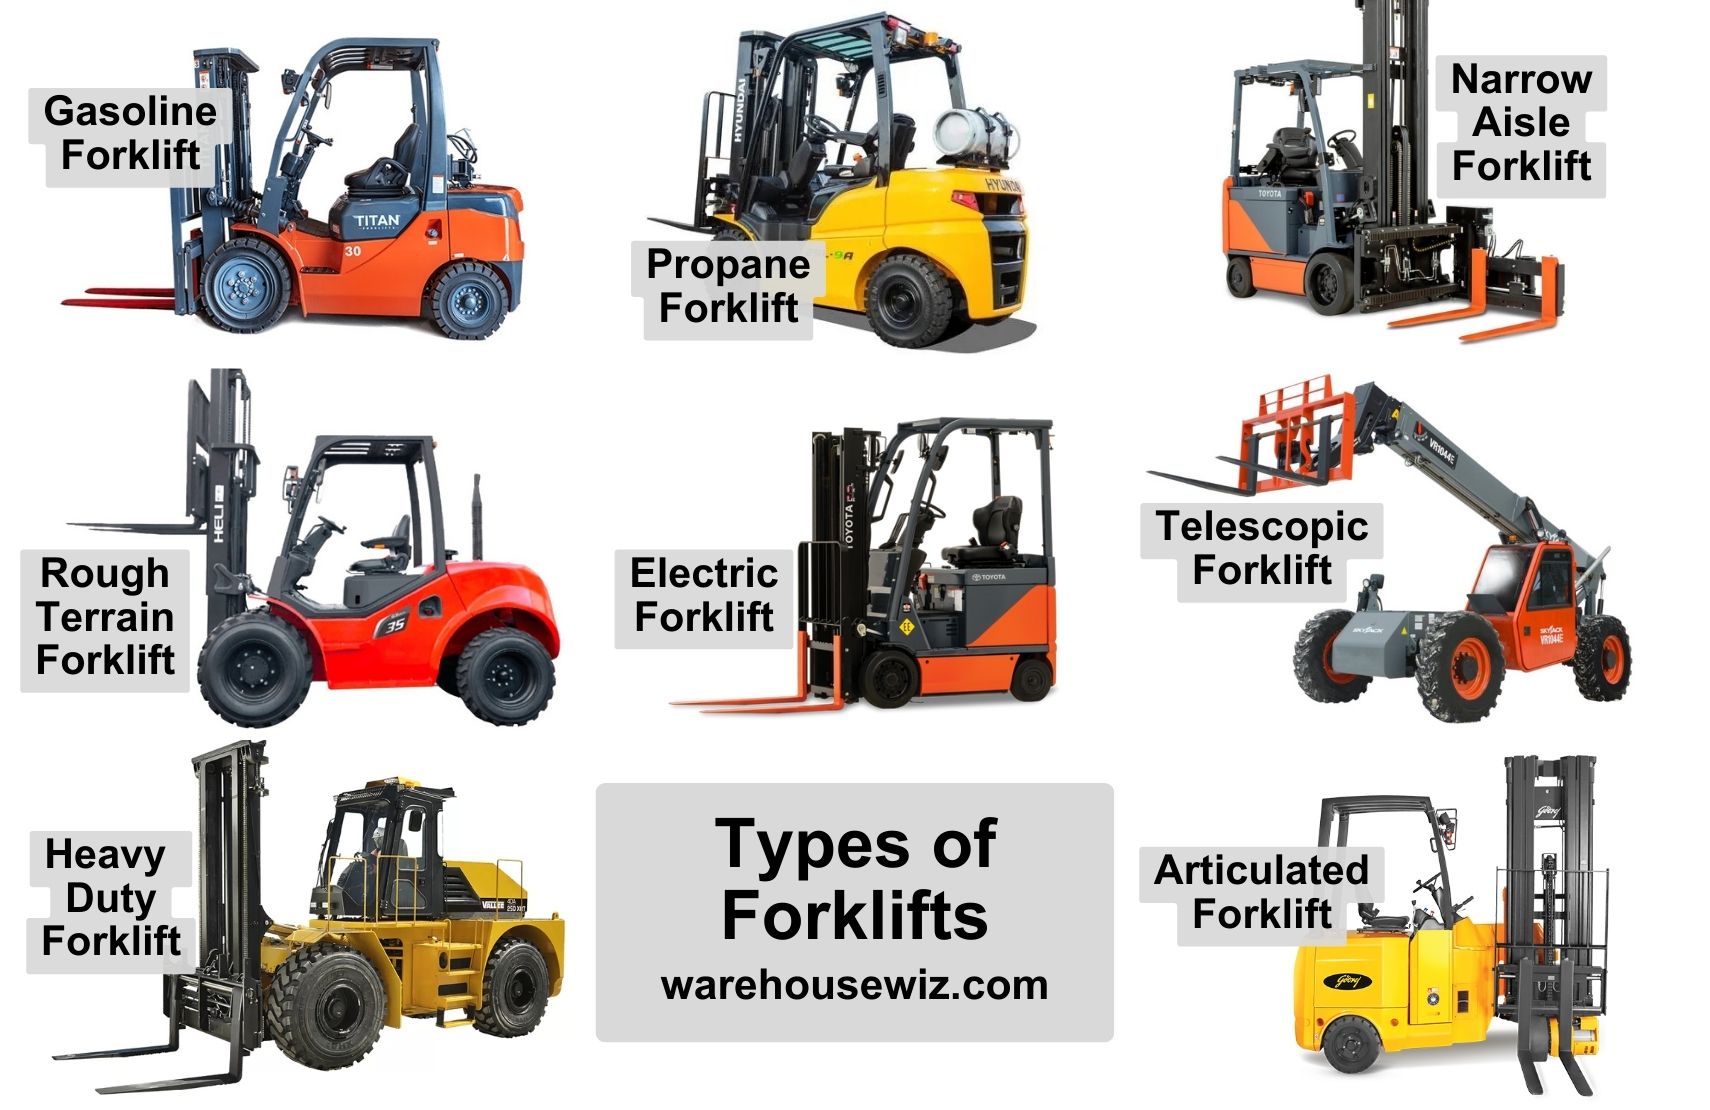 13 Types of Forklifts And What They're Used For